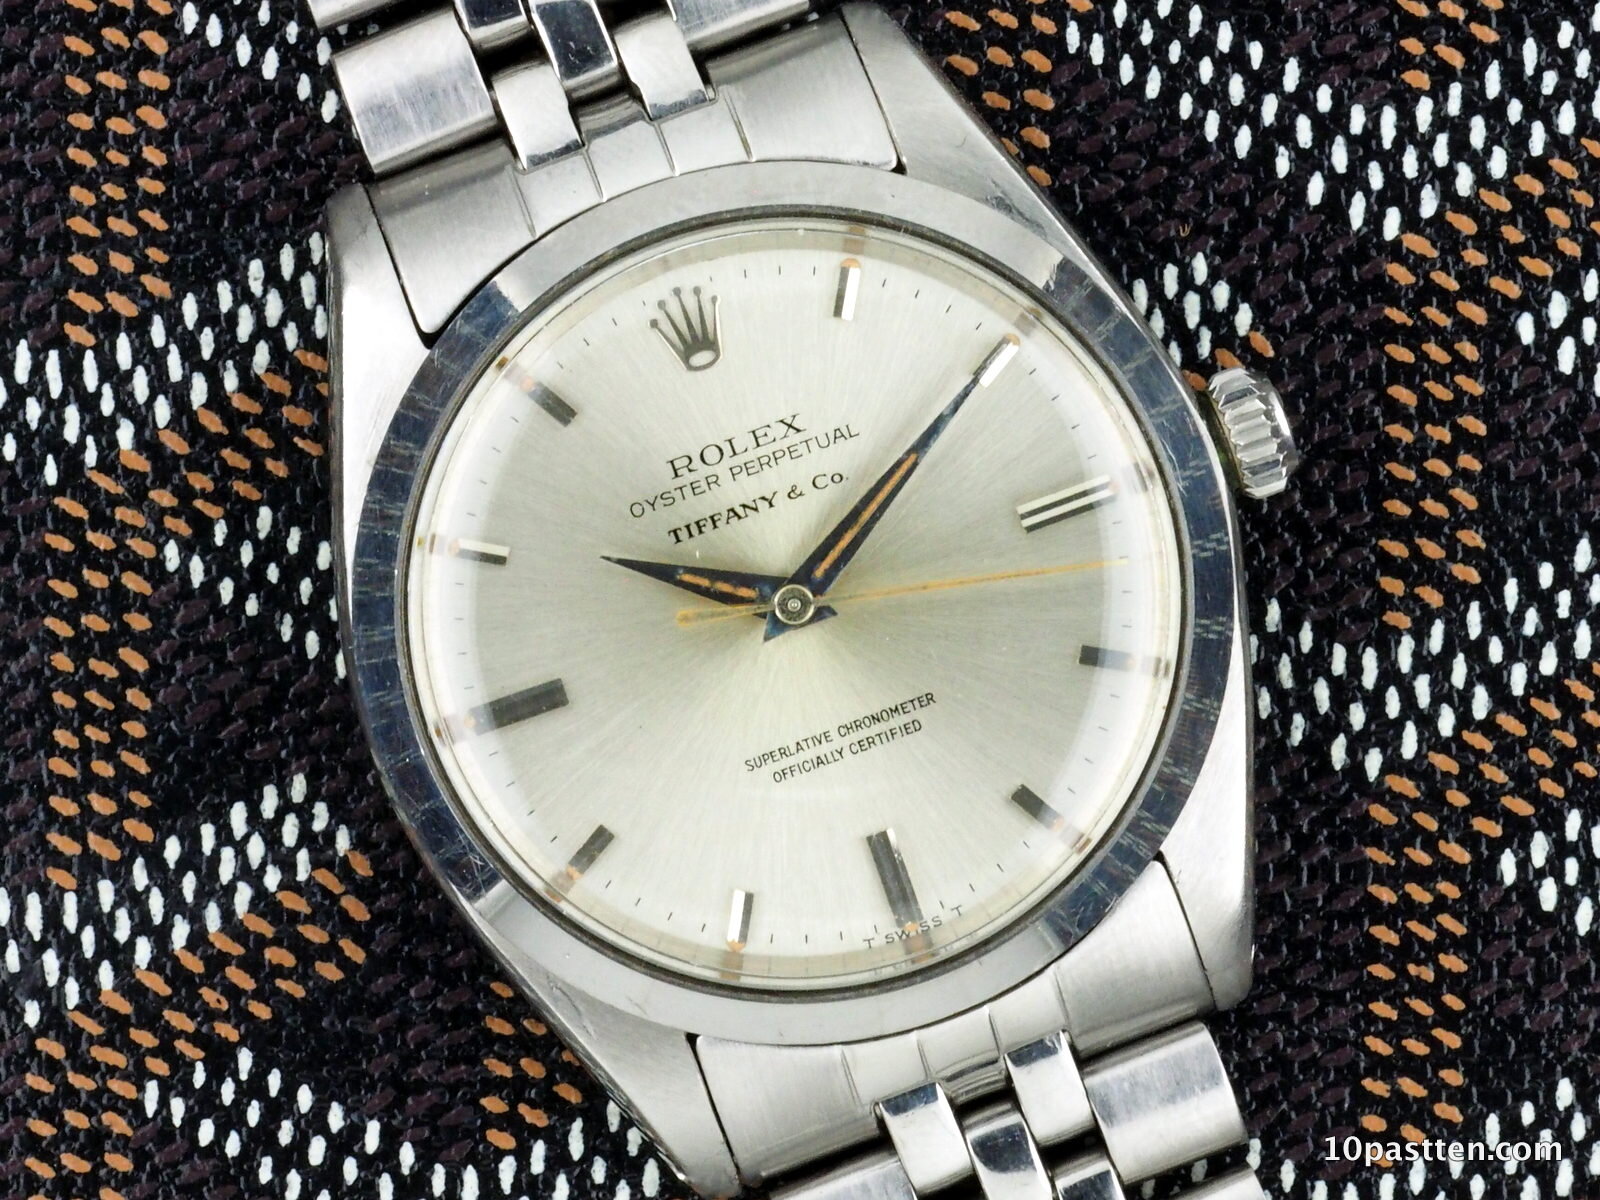 Rolex Oyster Perpetual Reference 1018 